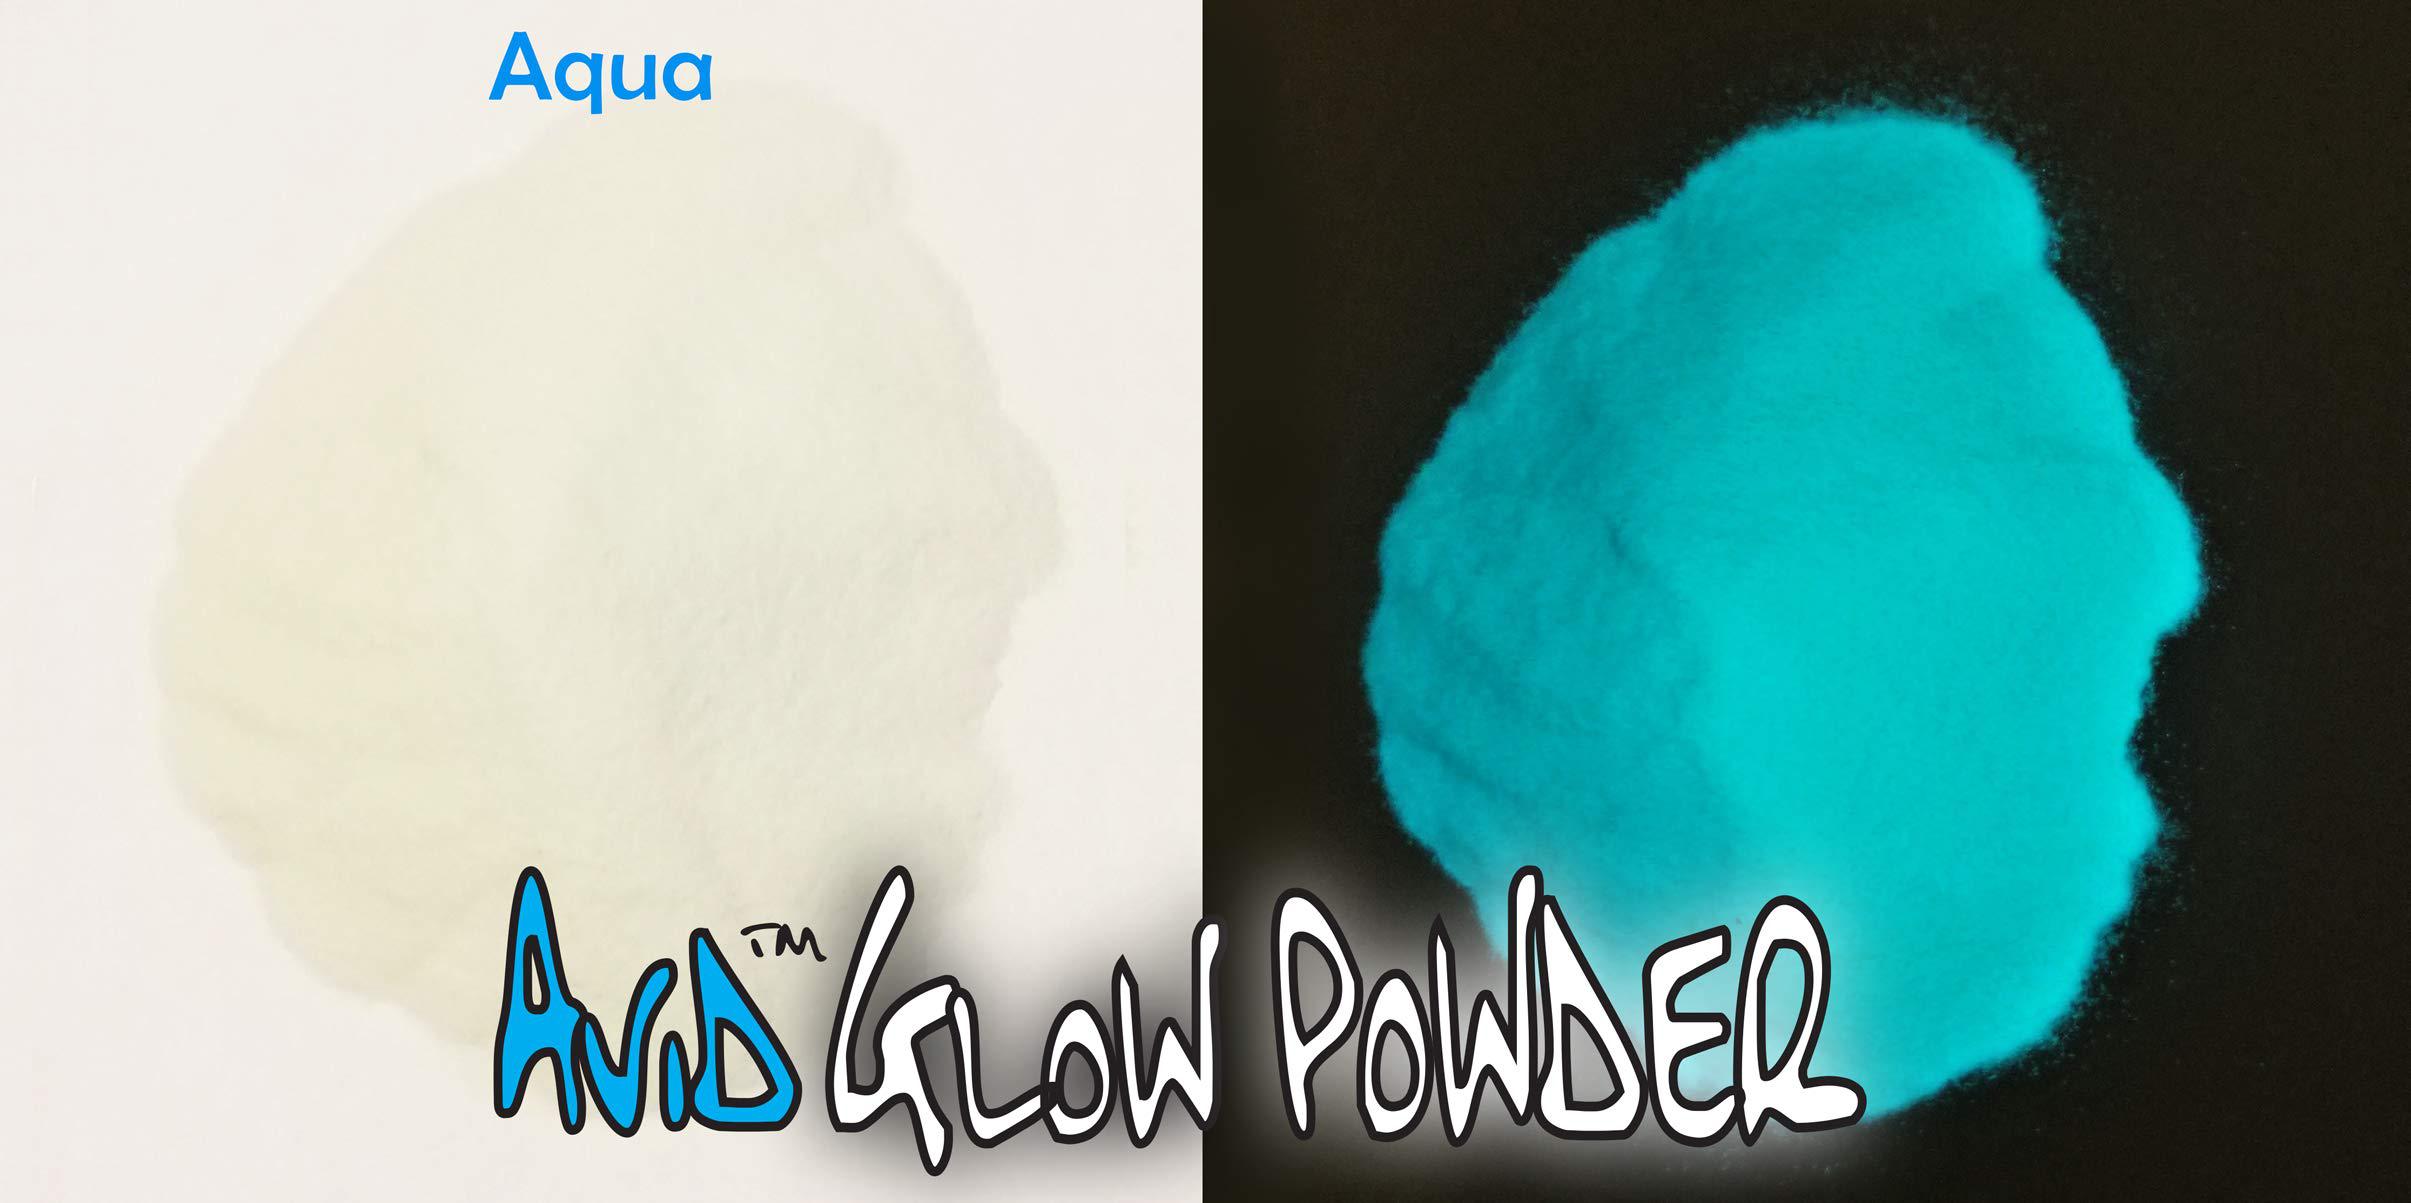 The Avid Colorist aqua glow powder-2.9oz (80g) neutral in daylight blue/green glow in the dark pigment powder for resin, slime, nail polish, pa